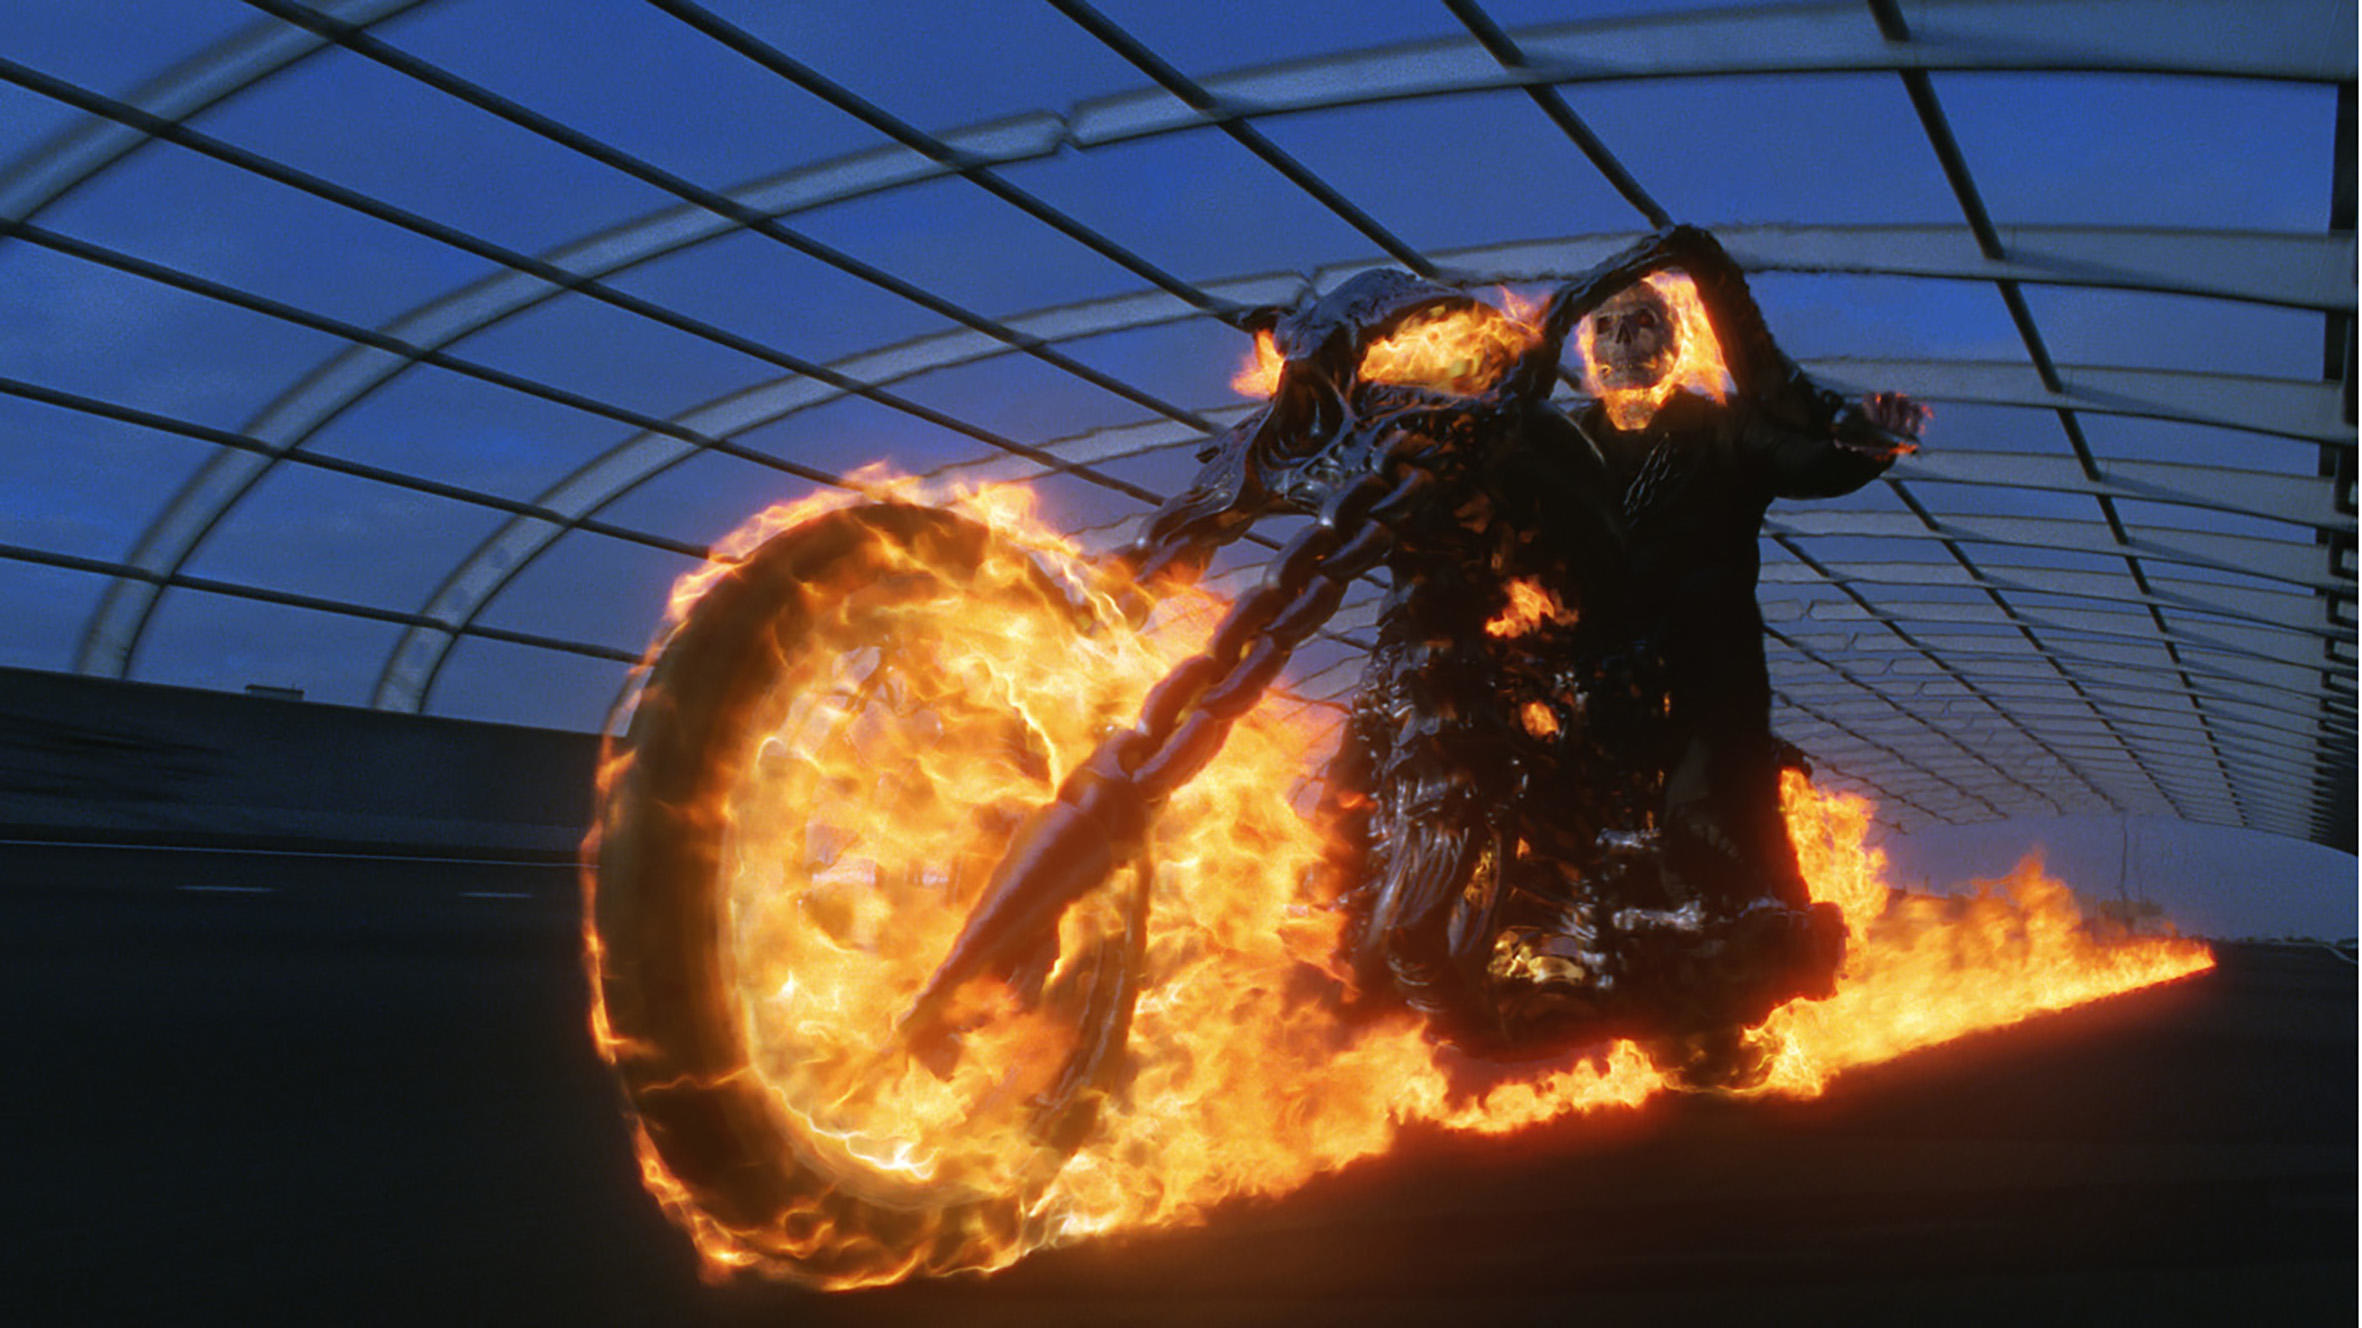 Johnny Blaze rides on a burning motorcycle in &quot;Ghost Rider&quot;